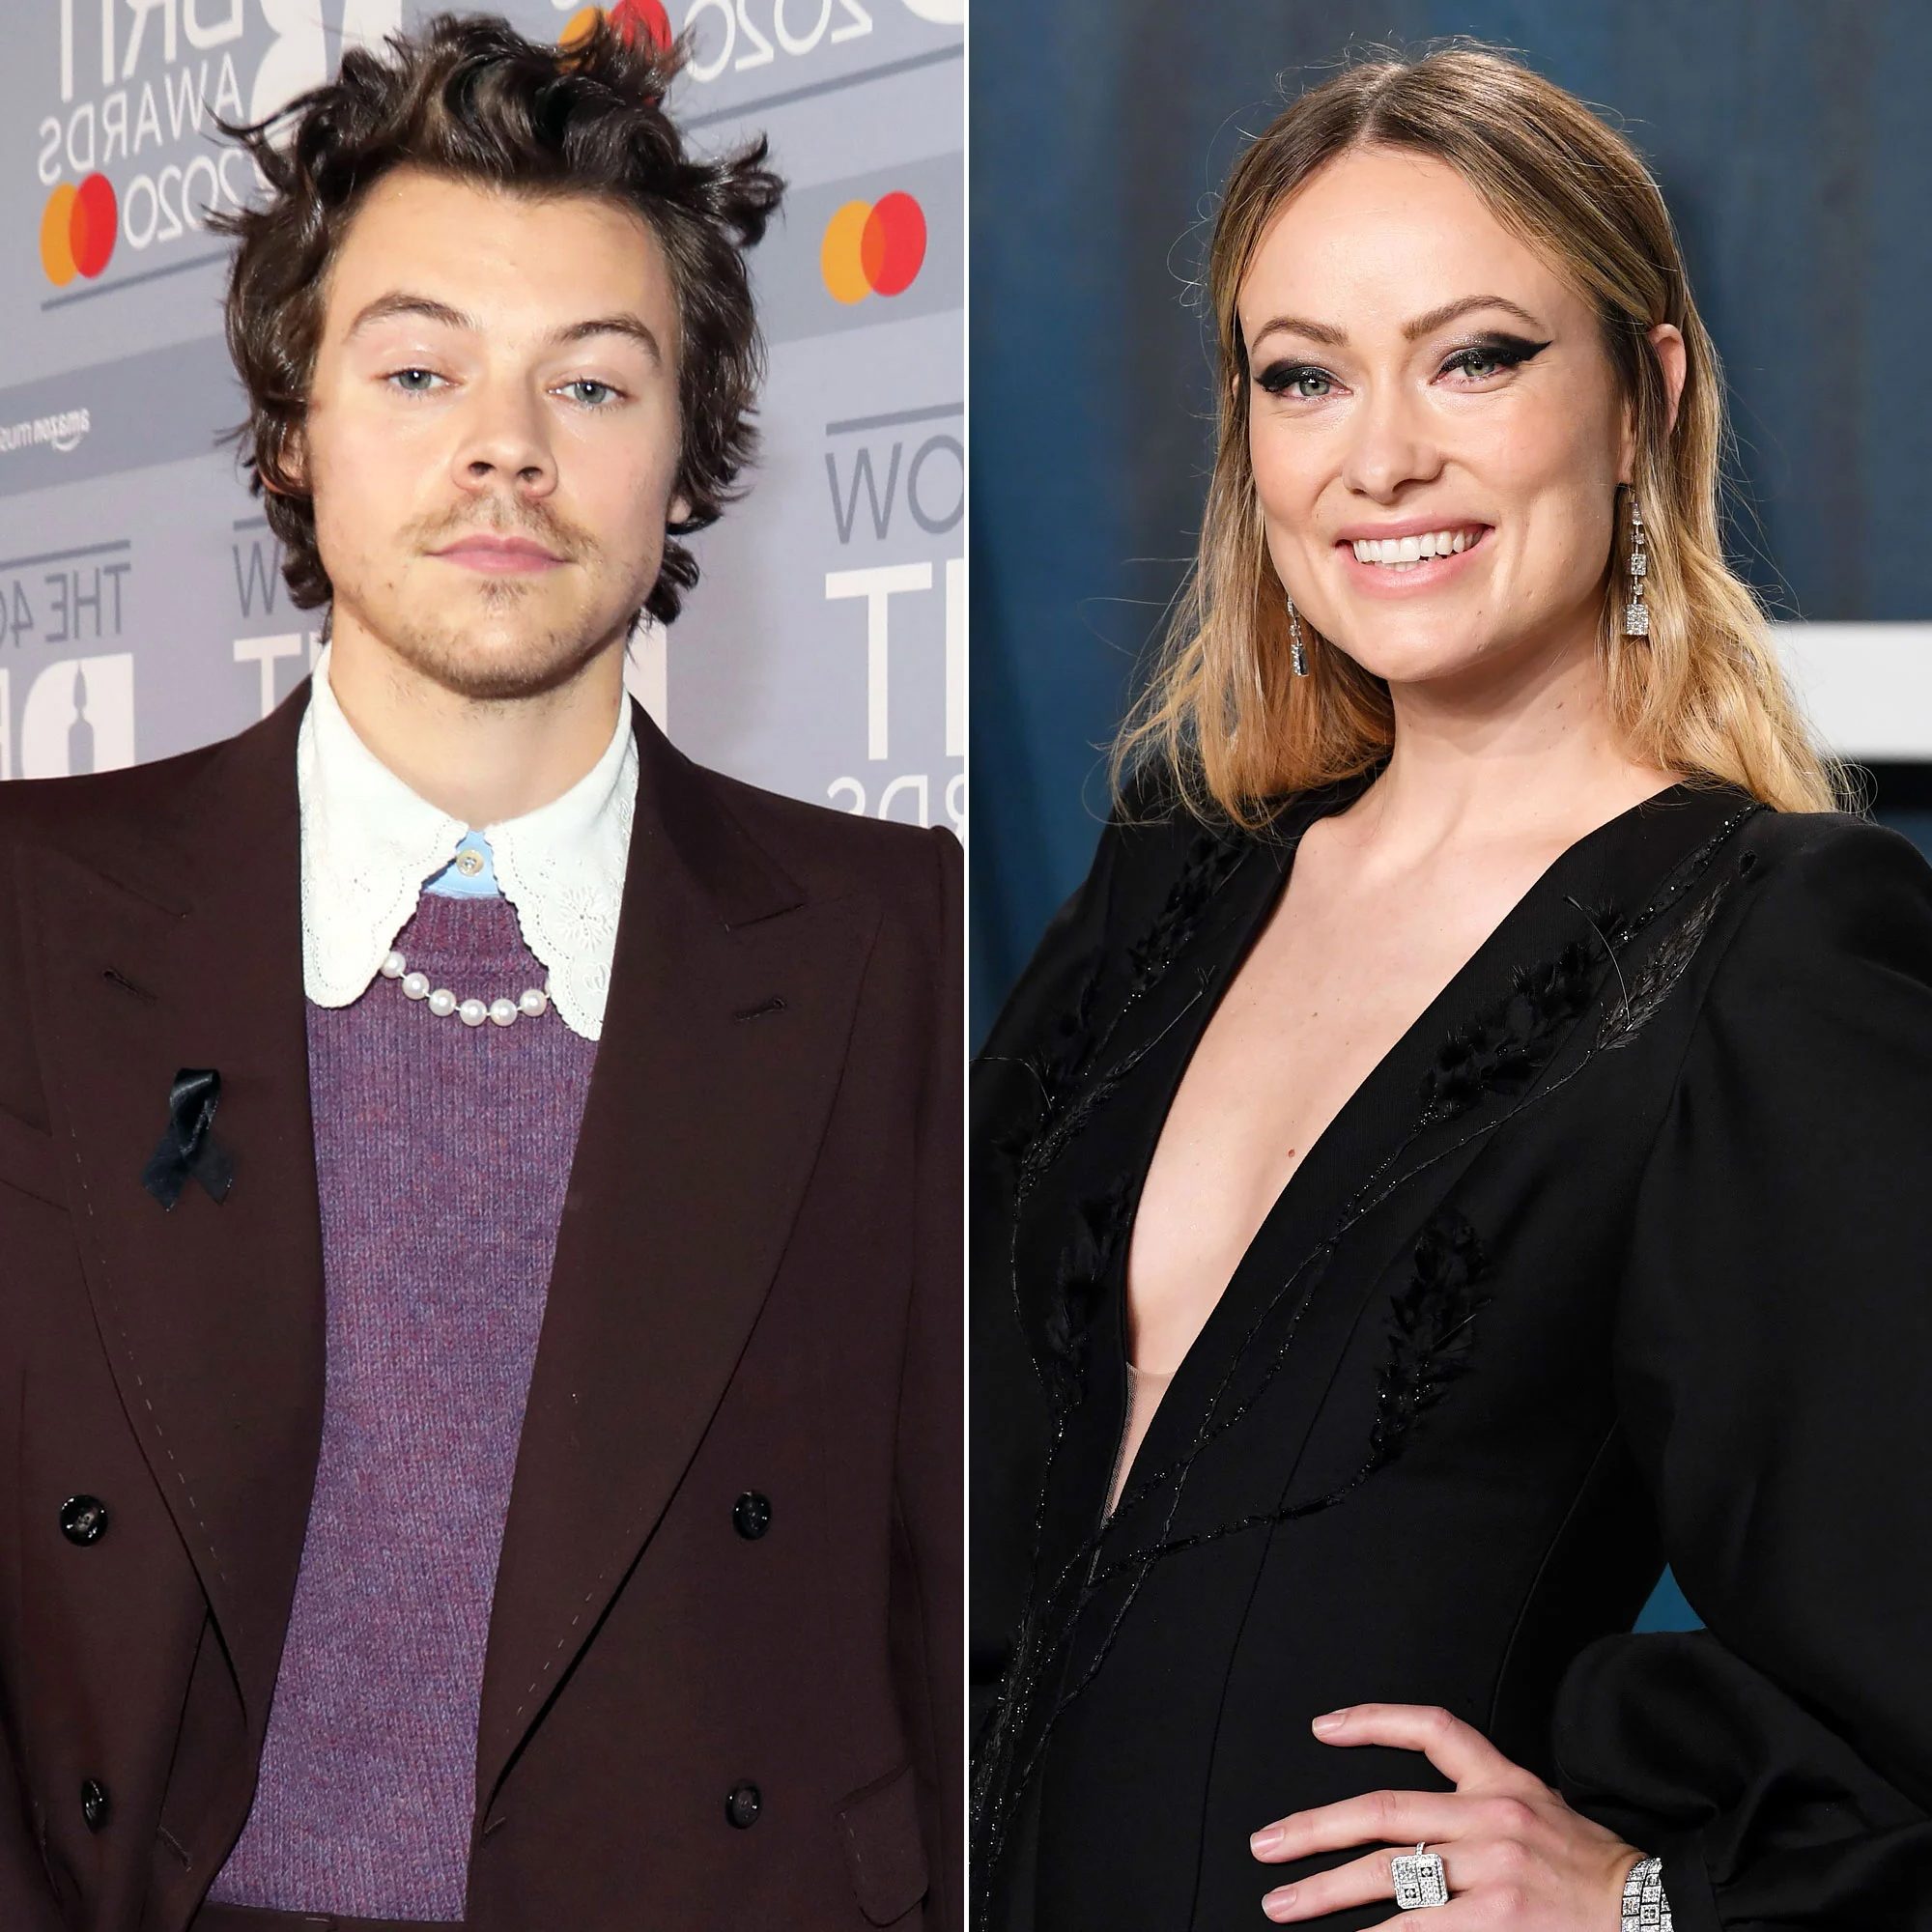 Harry Styles and Olivia Wilde Have Talked About Getting Engaged